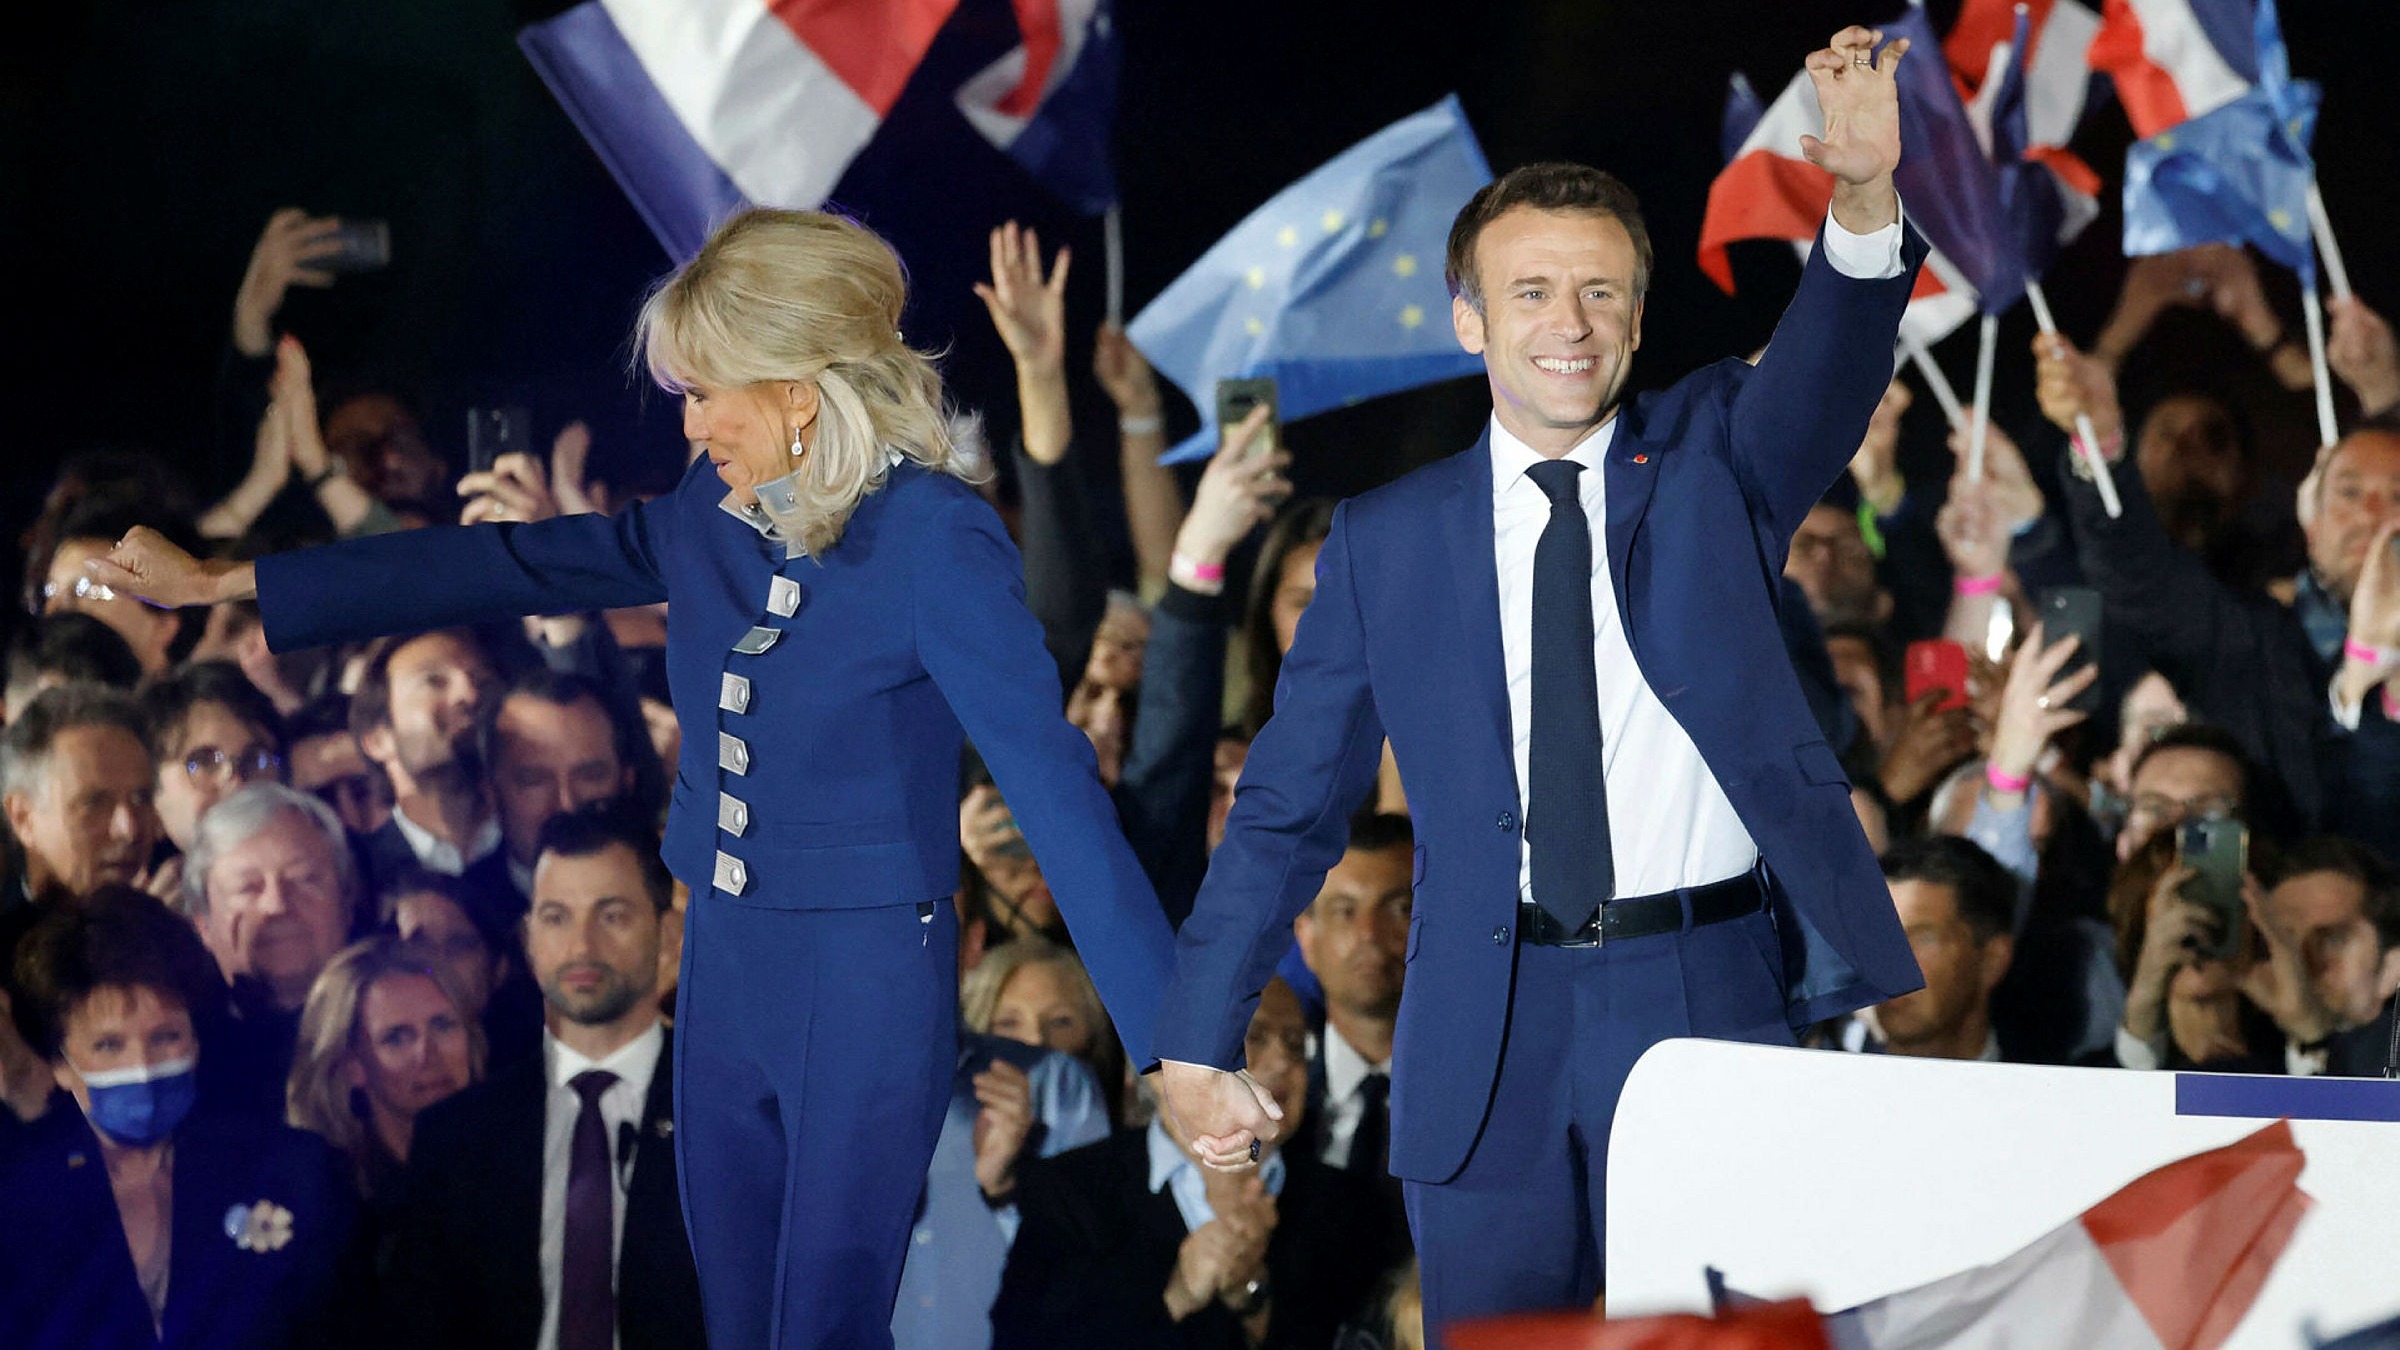 Macron defeats Le Pen in French elections